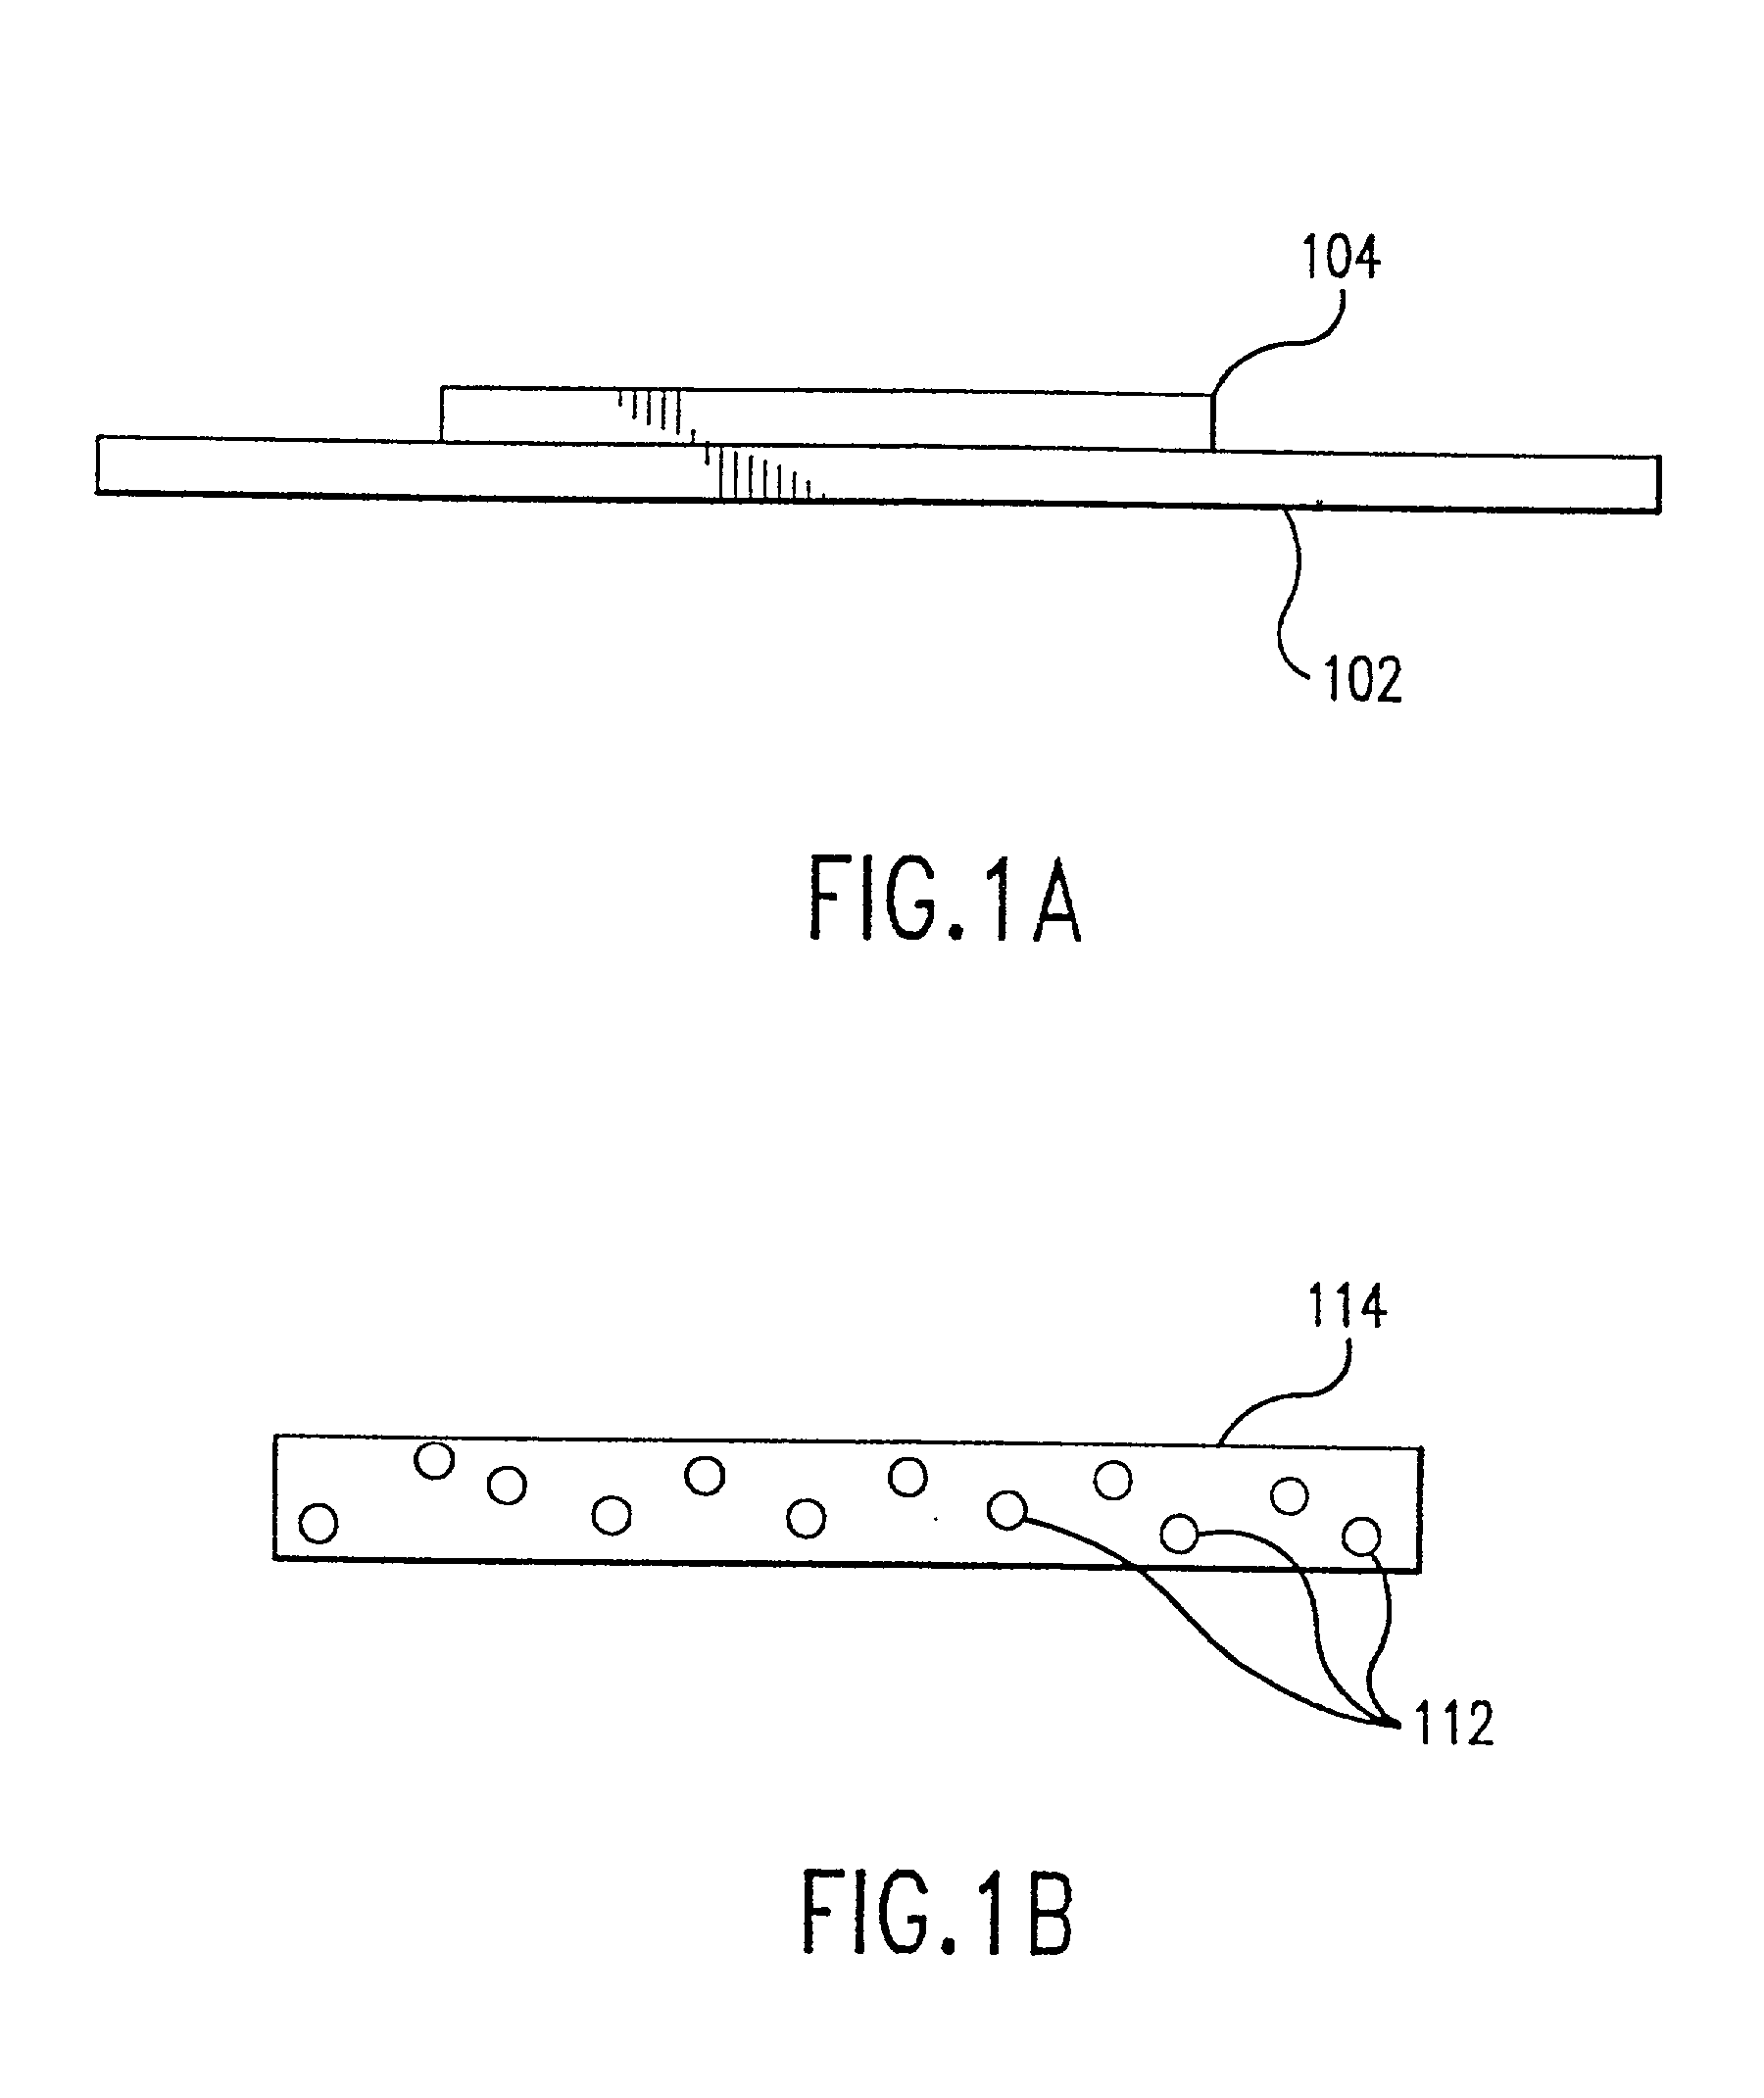 Apparatus for RF active compositions used in adhesion, bonding, and coating